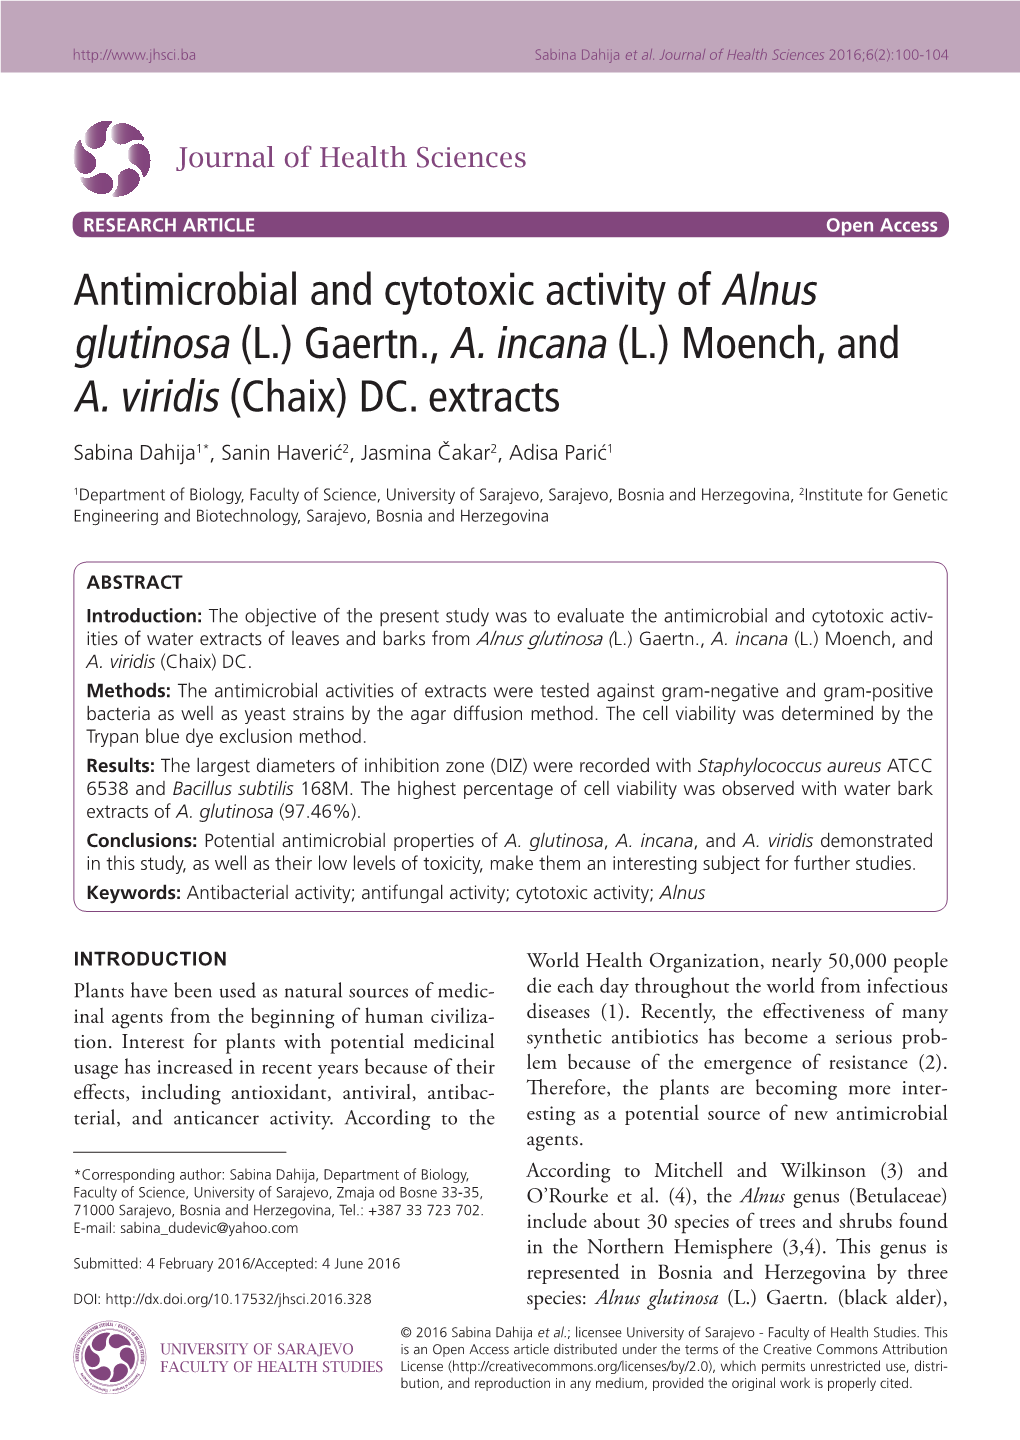 Antimicrobial and Cytotoxic Activity of Alnus Glutinosa (L.) Gaertn., A